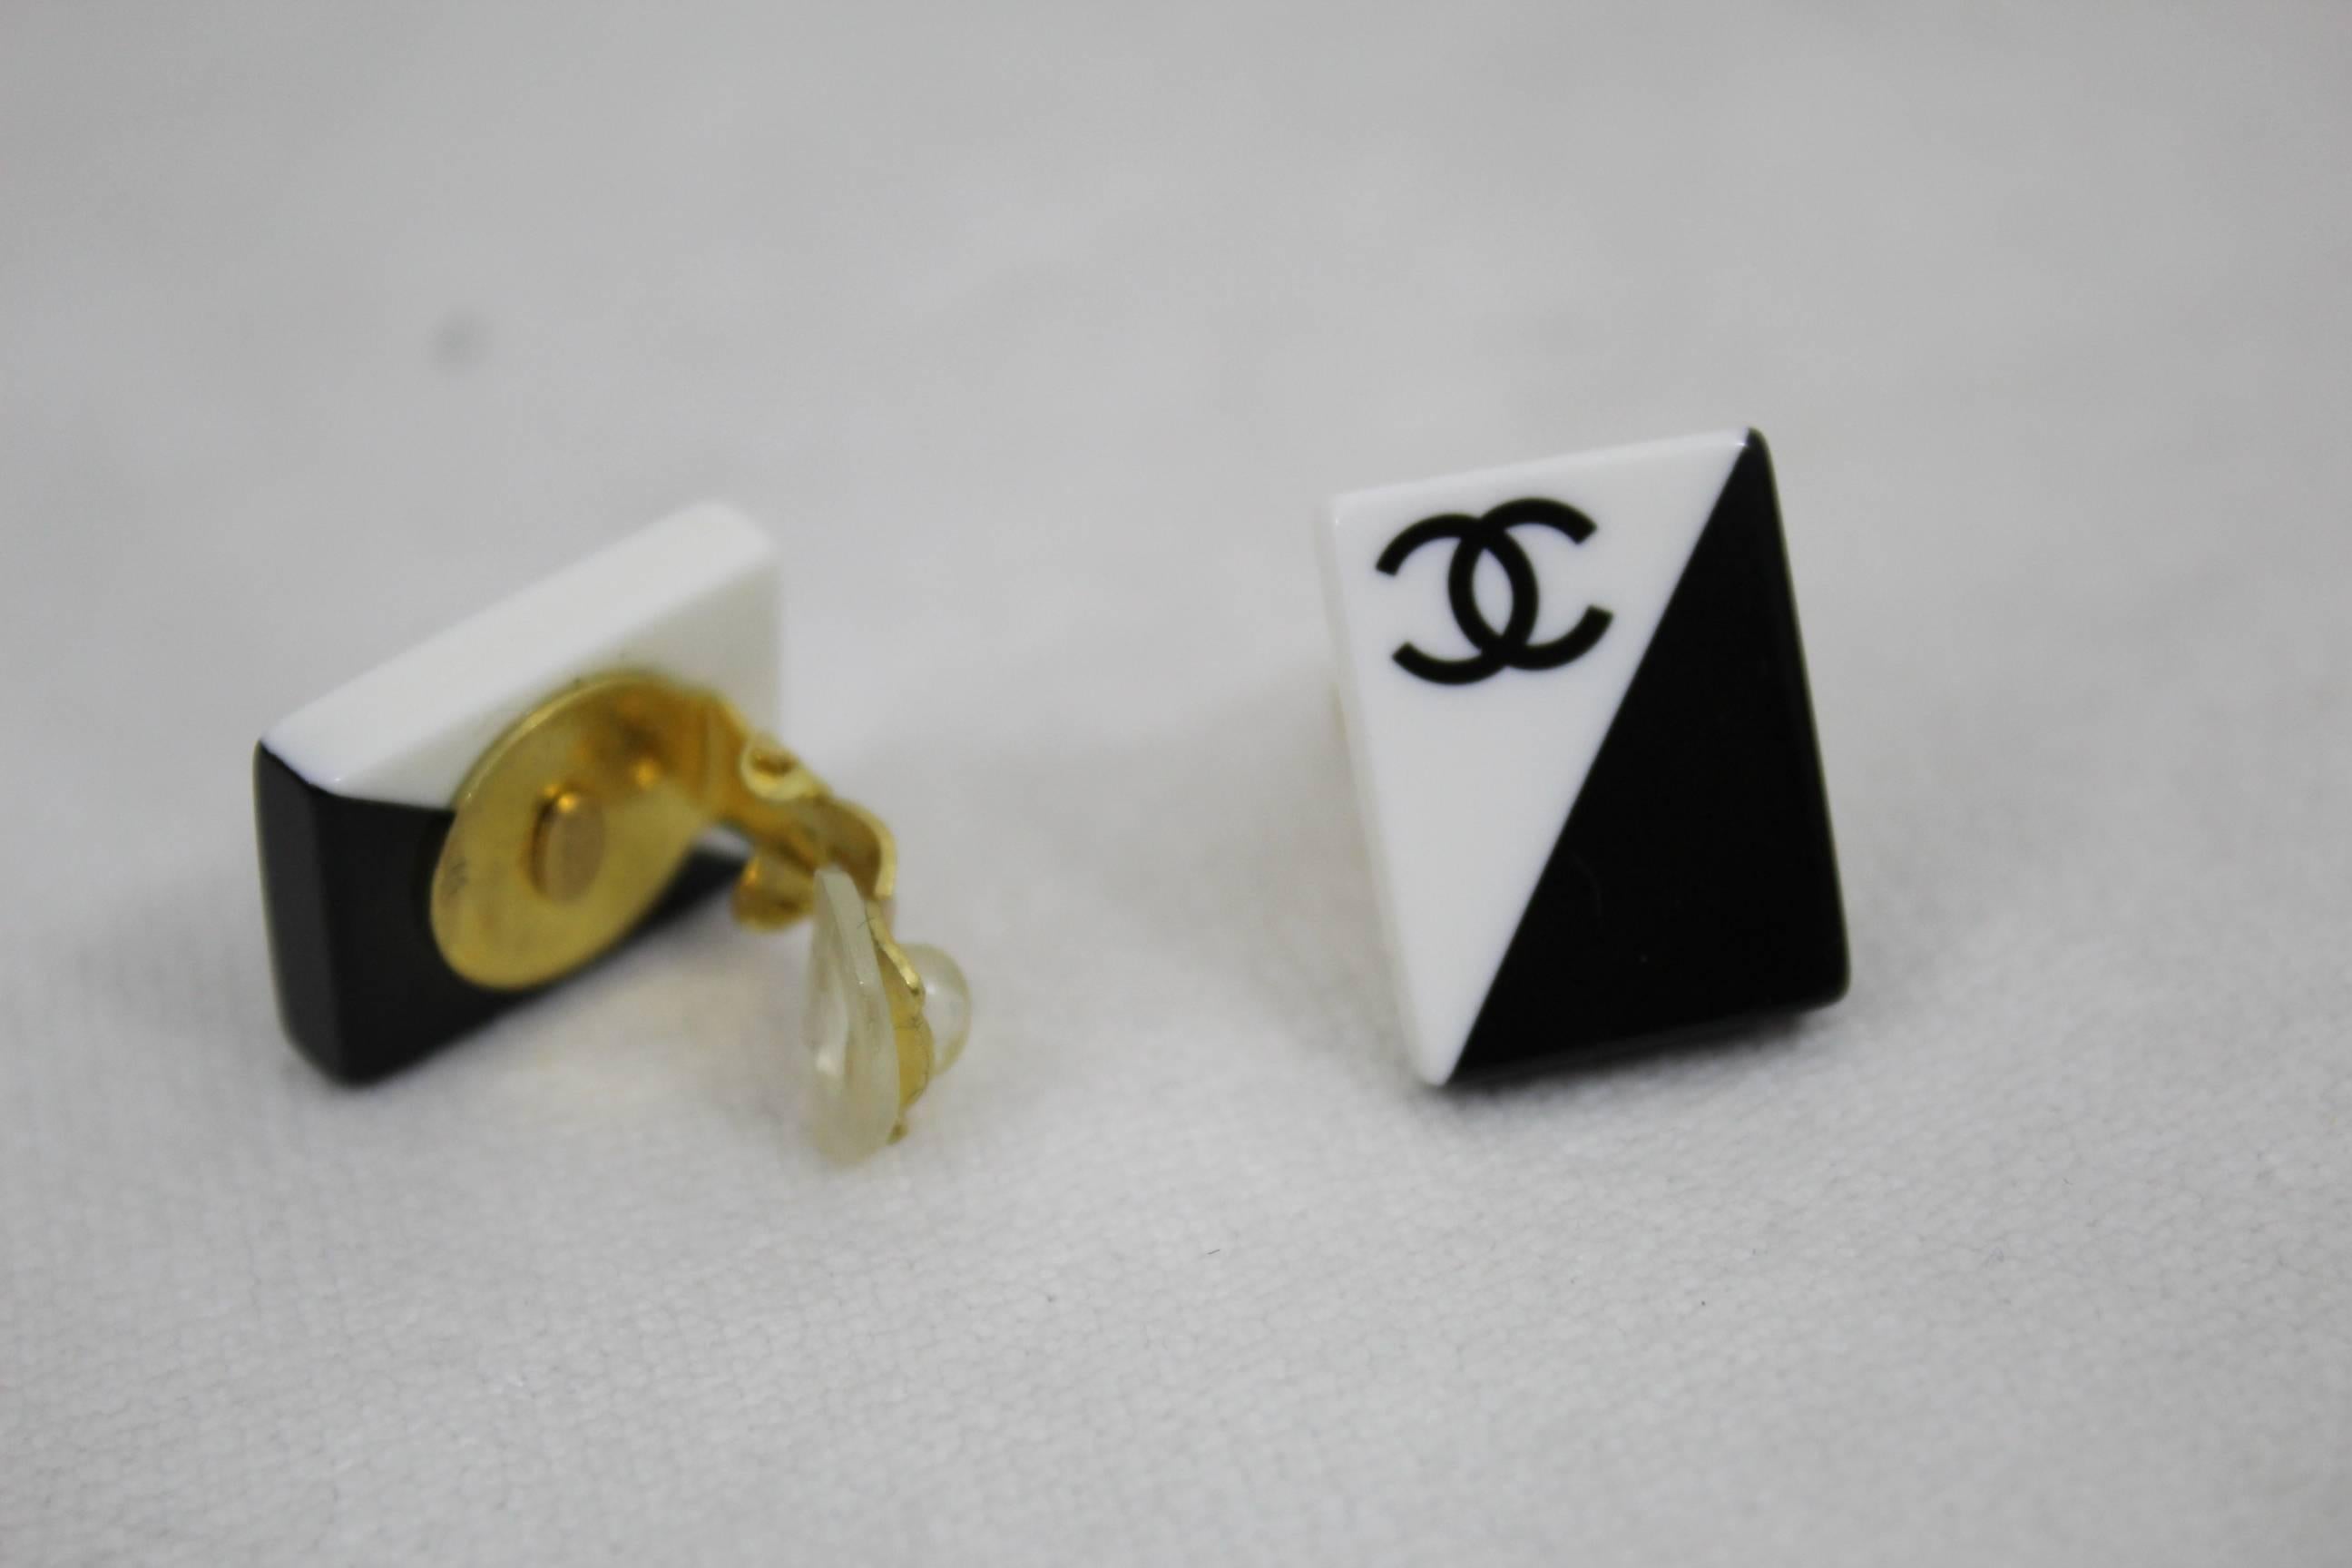 Nice Black and White pair of Chanel earrings. Size 2 cm.

Clip system